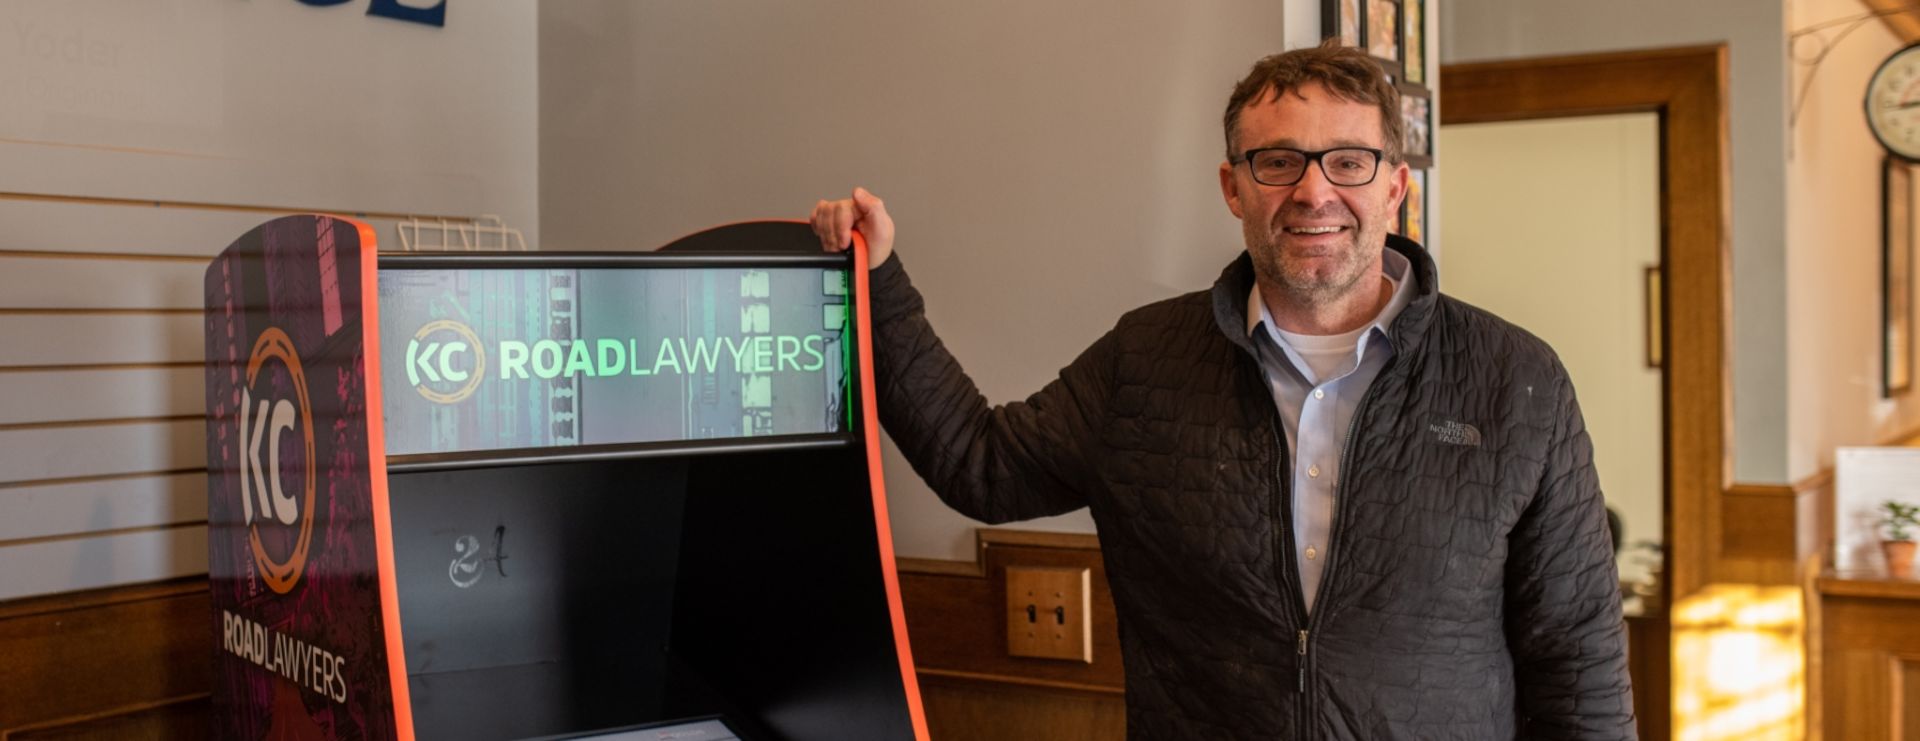 Attorney Chris Benjamin stands next to the KC Road Lawyer arcade Game.